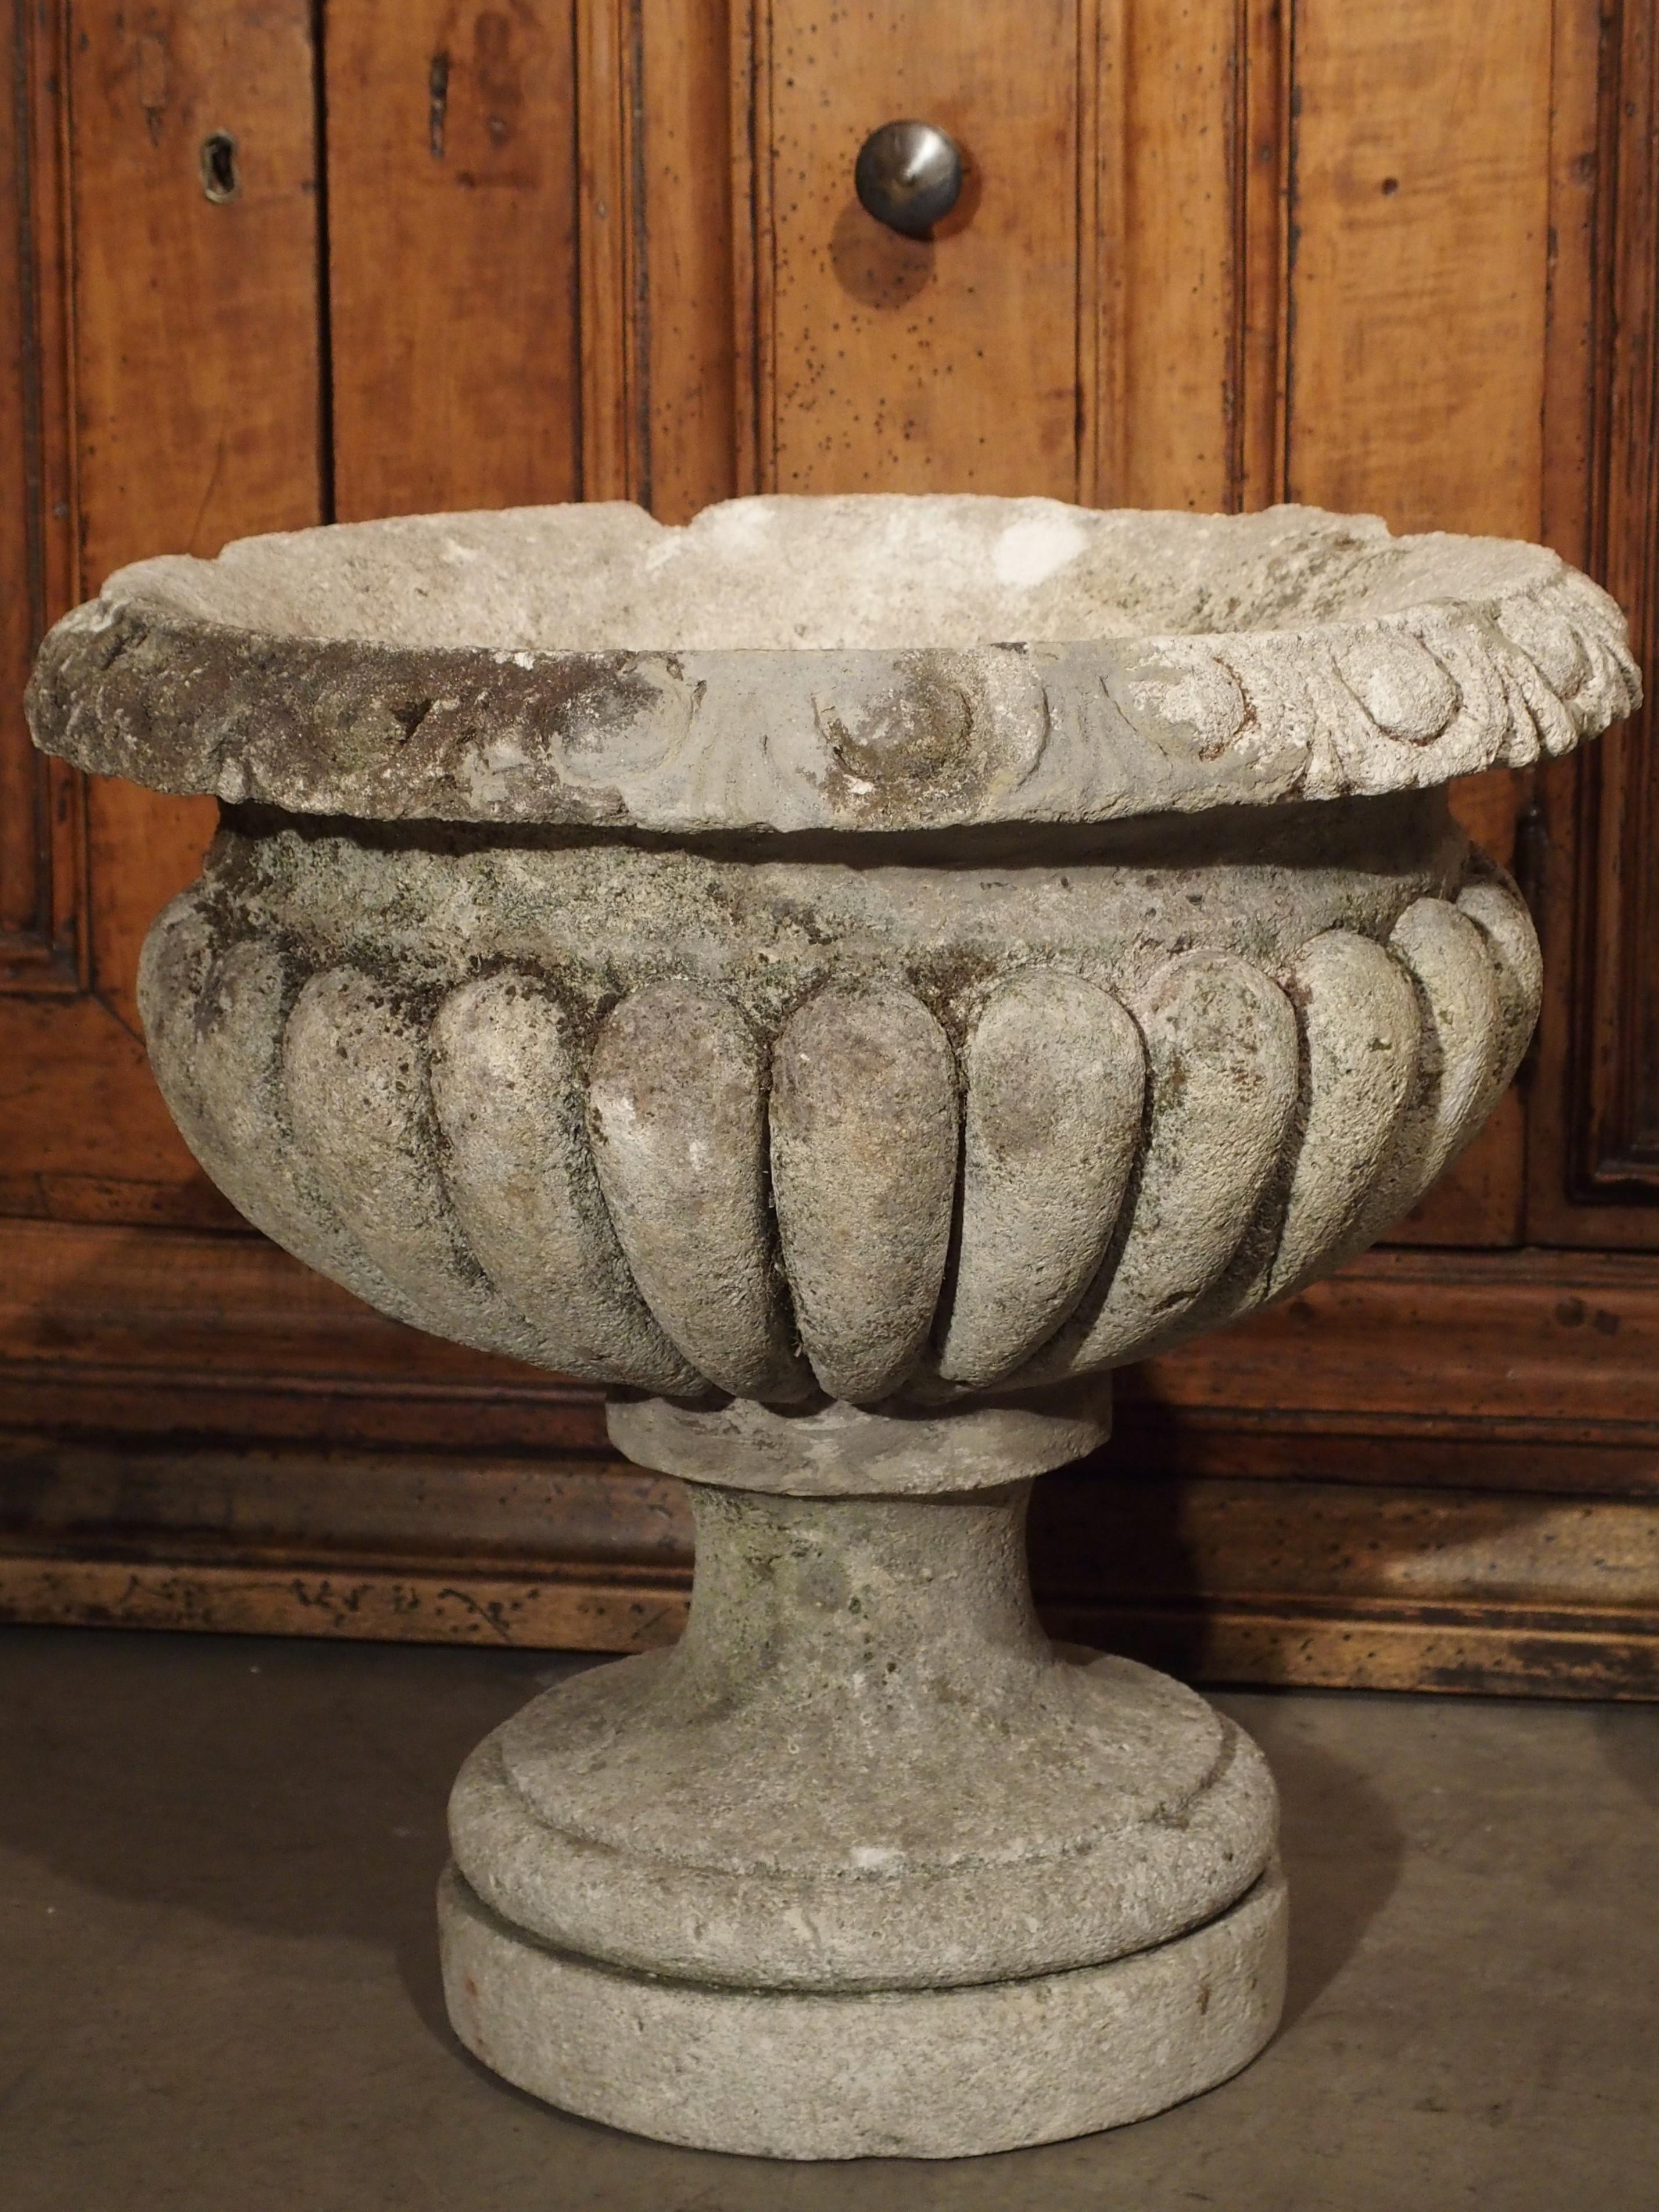 Hand-Carved Carved Vicenza Stone Vases from Italy, circa 1900